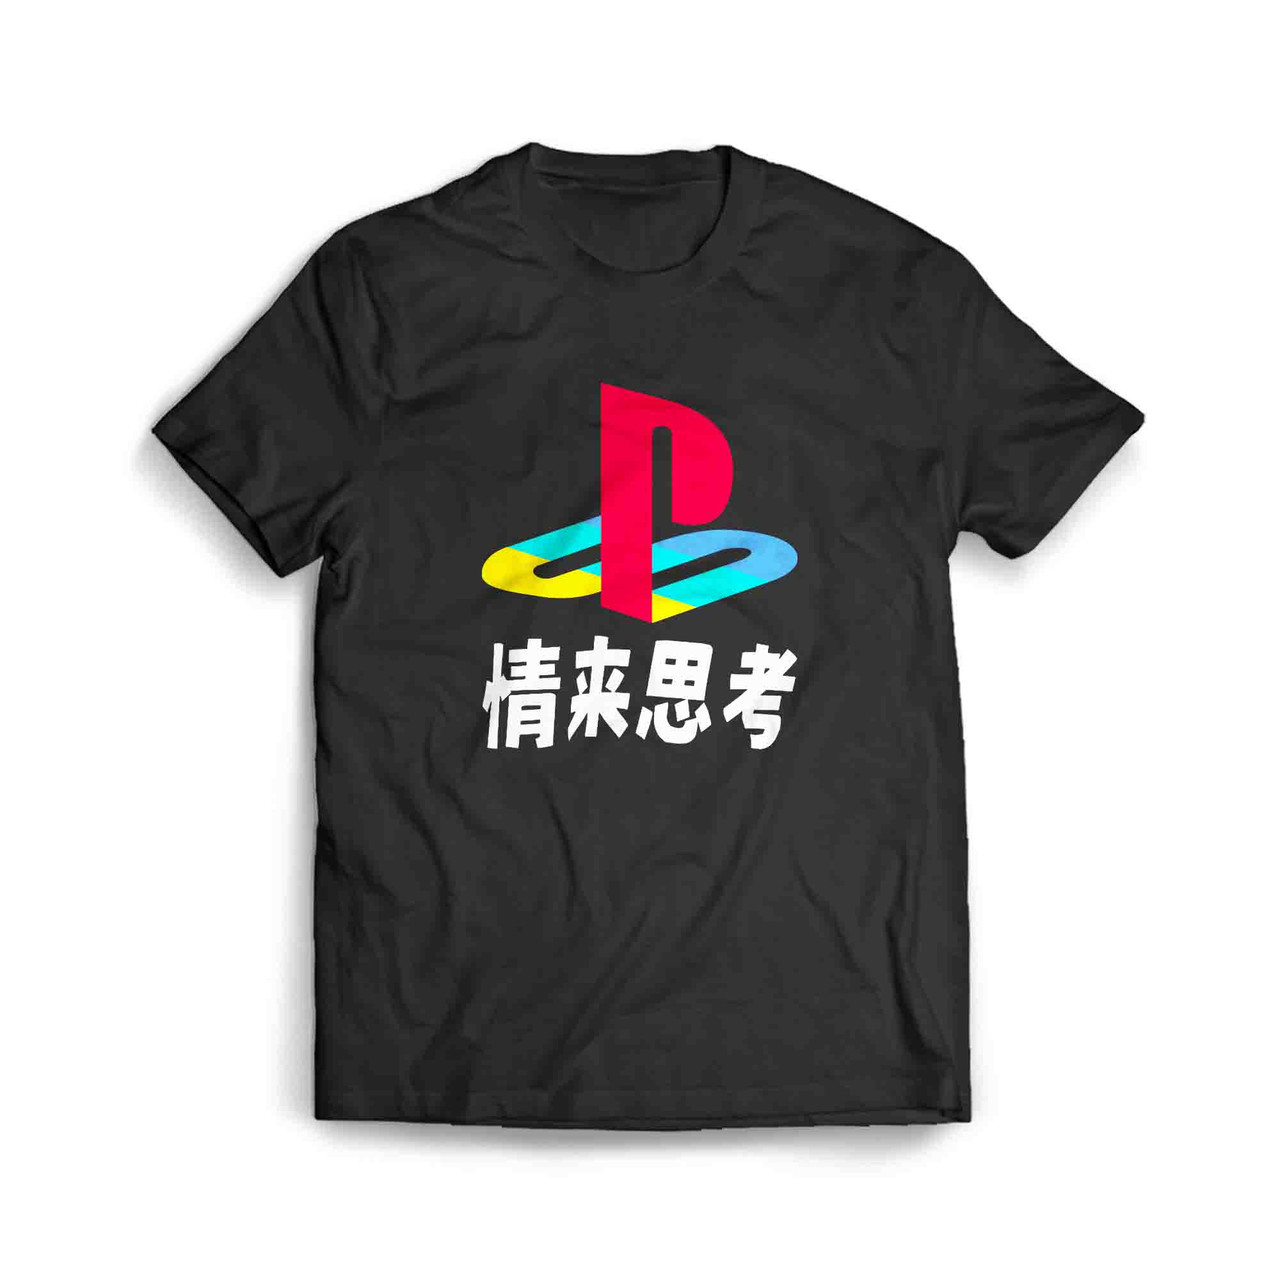 https://cdn11.bigcommerce.com/s-fbh9rcmv2i/images/stencil/1280x1280/products/431593/471100/playstation_japanese_gaming__84074.1686203110.jpg?c=1